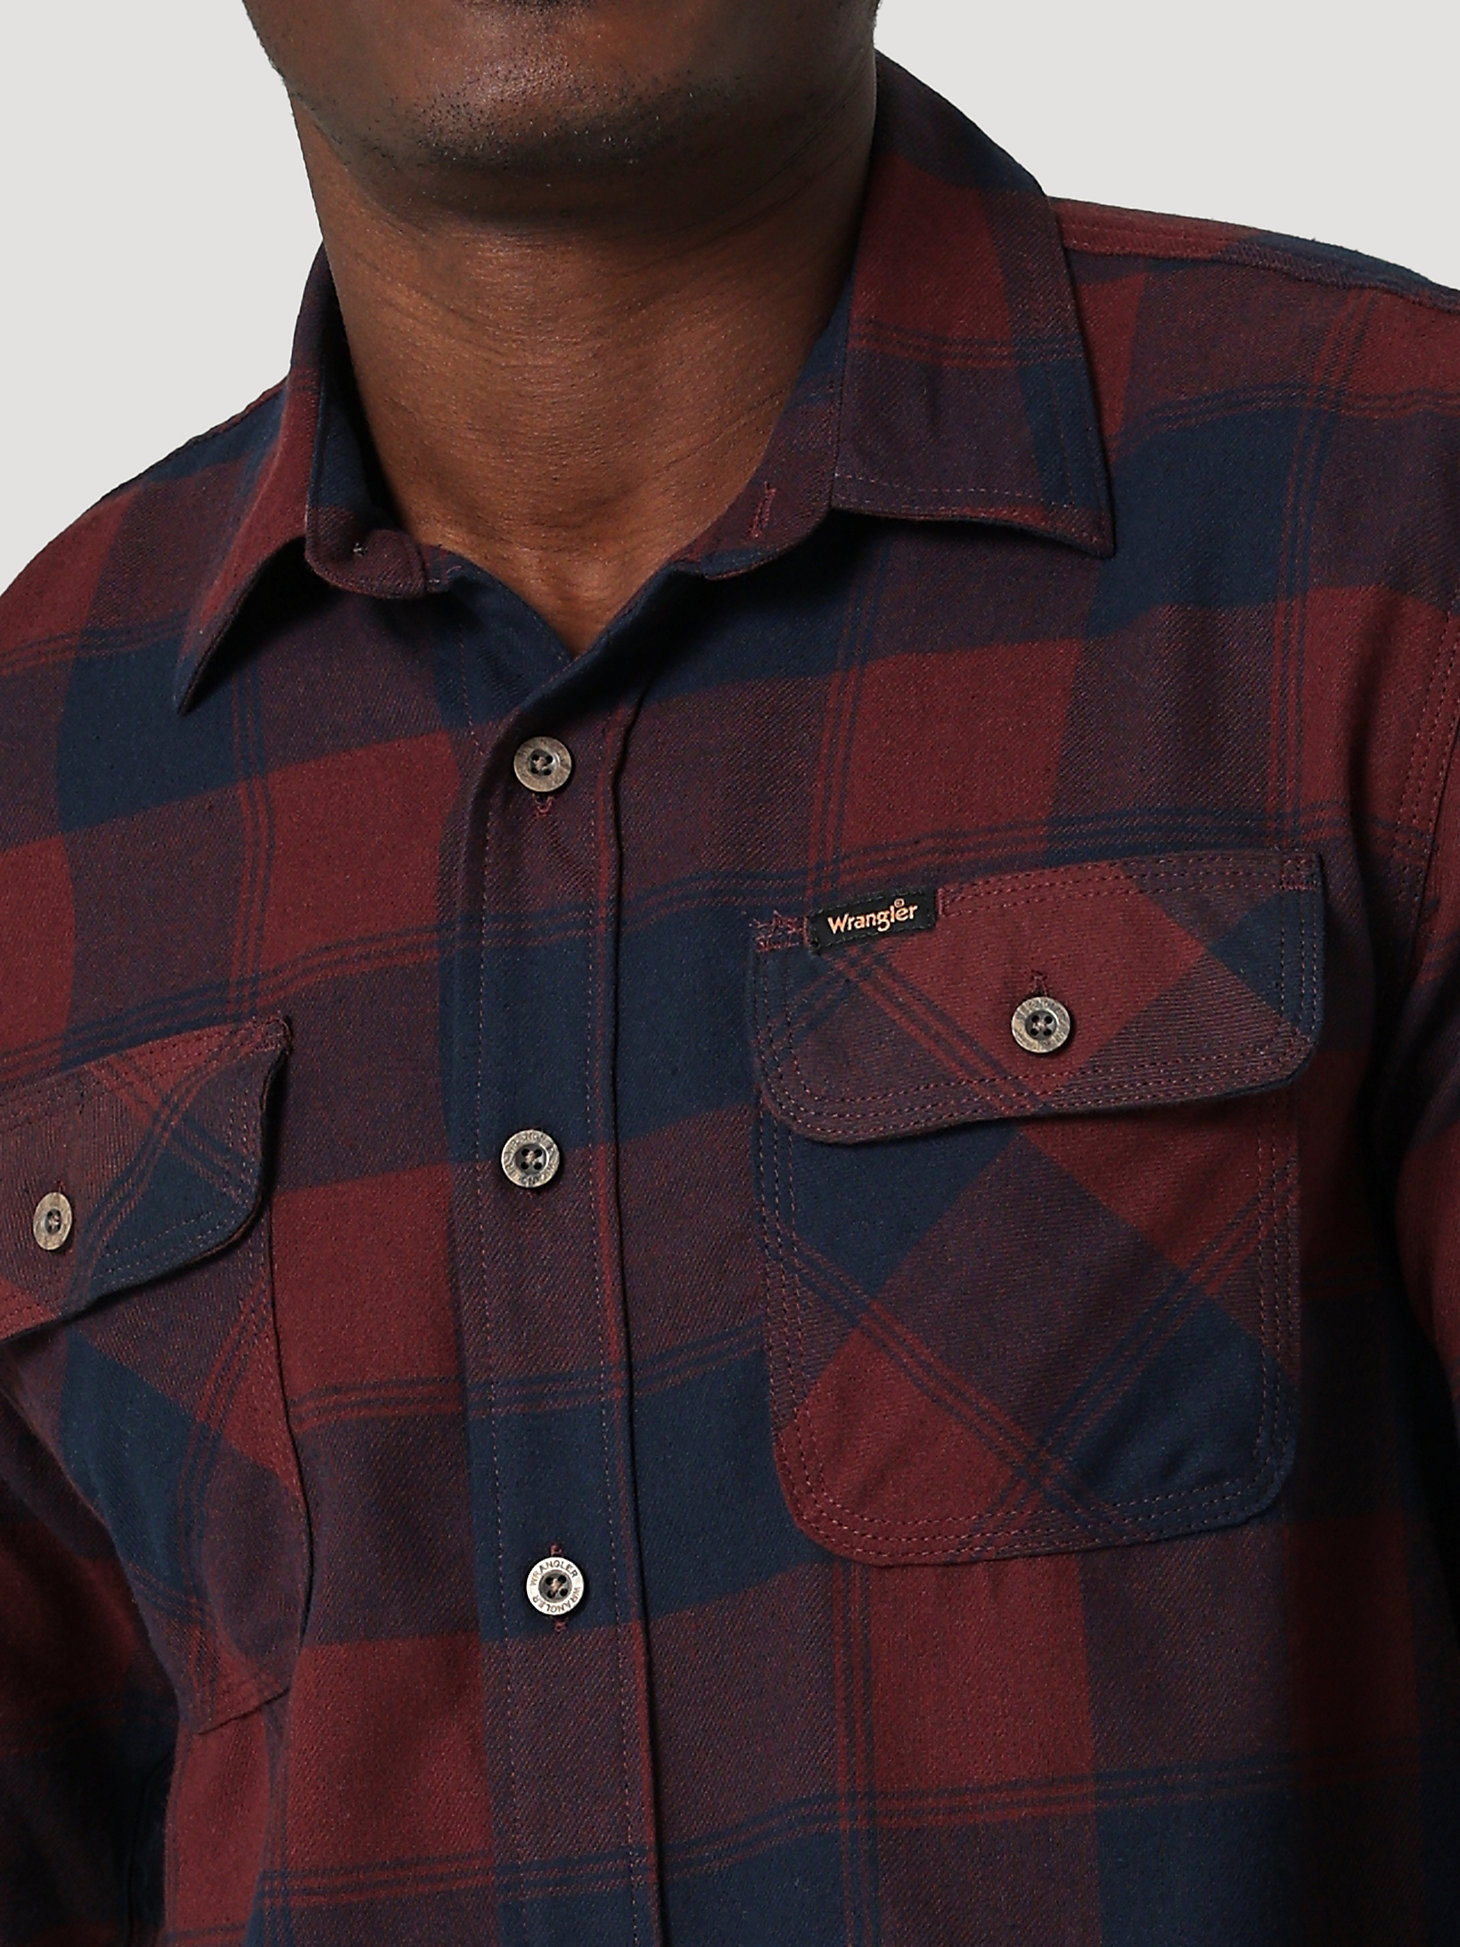 Men's Epic Soft Brushed Flannel Plaid Shirt in Decadent Chocolate alternative view 2